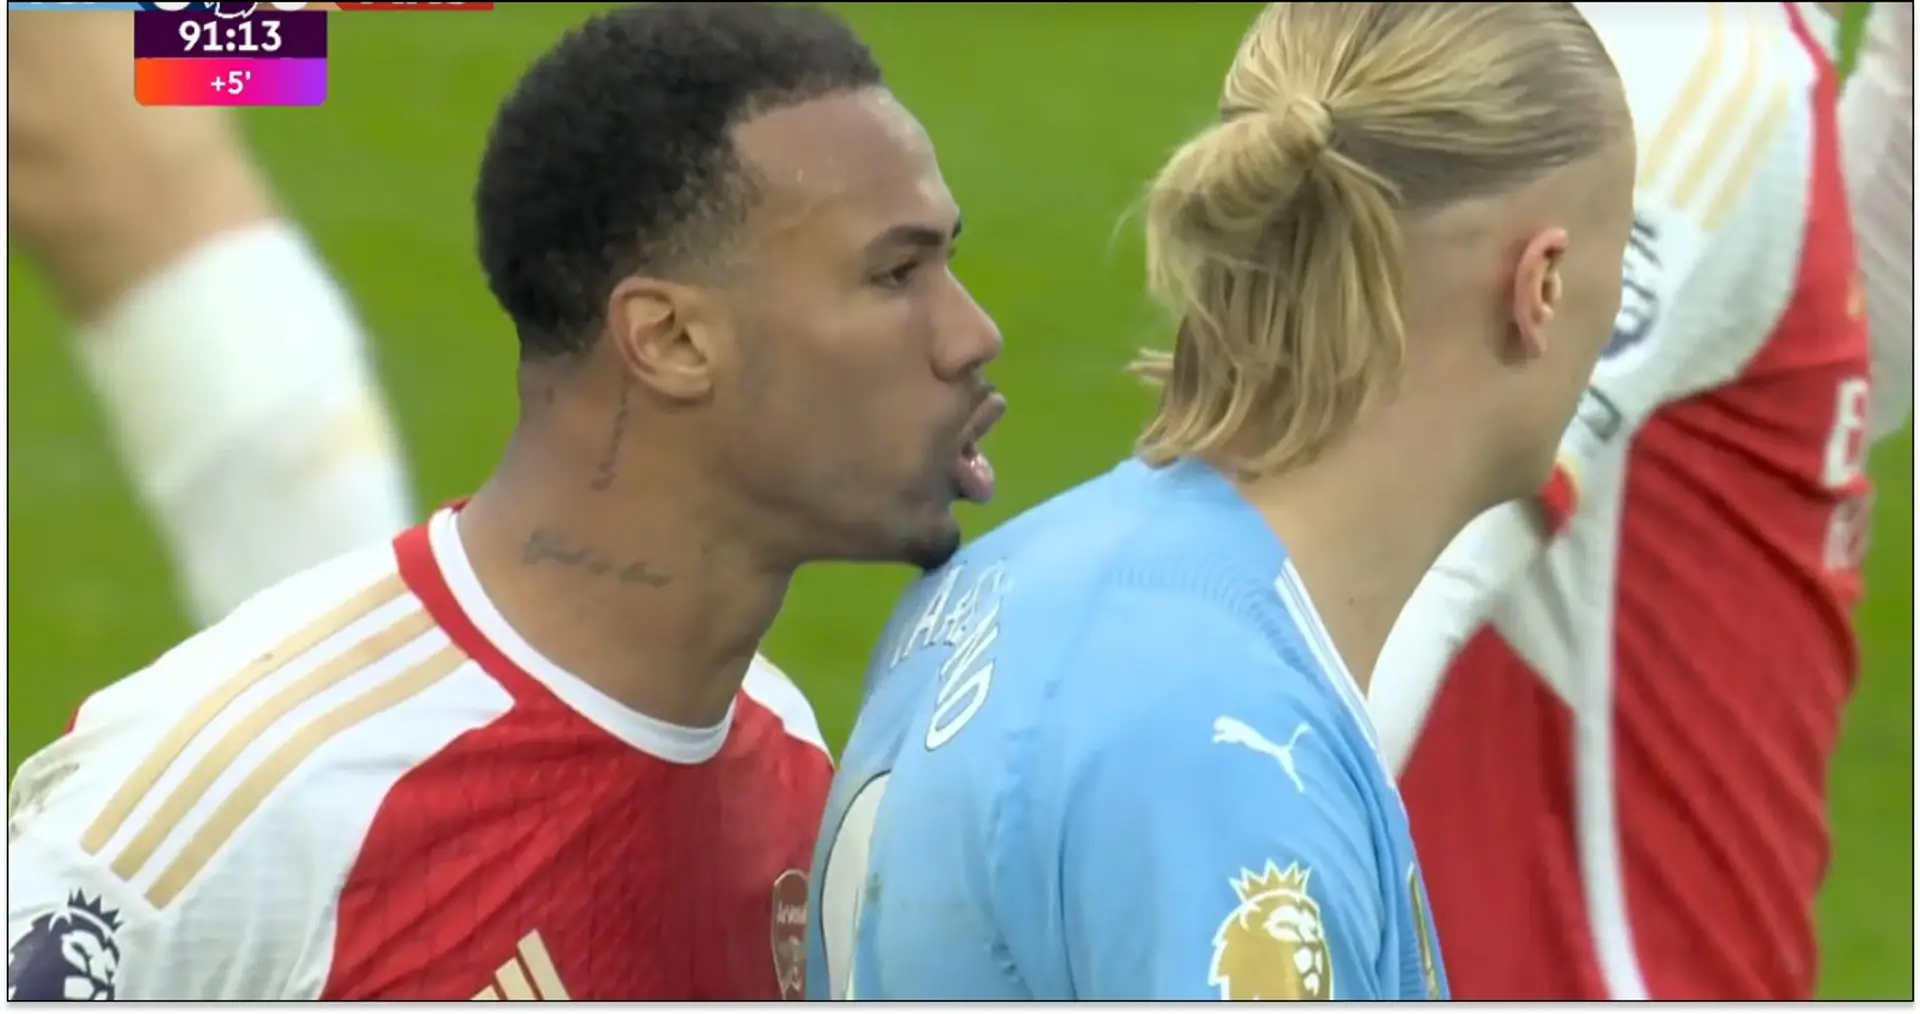 Gabriel & Haaland face off during & after Arsenal v City — what happens next